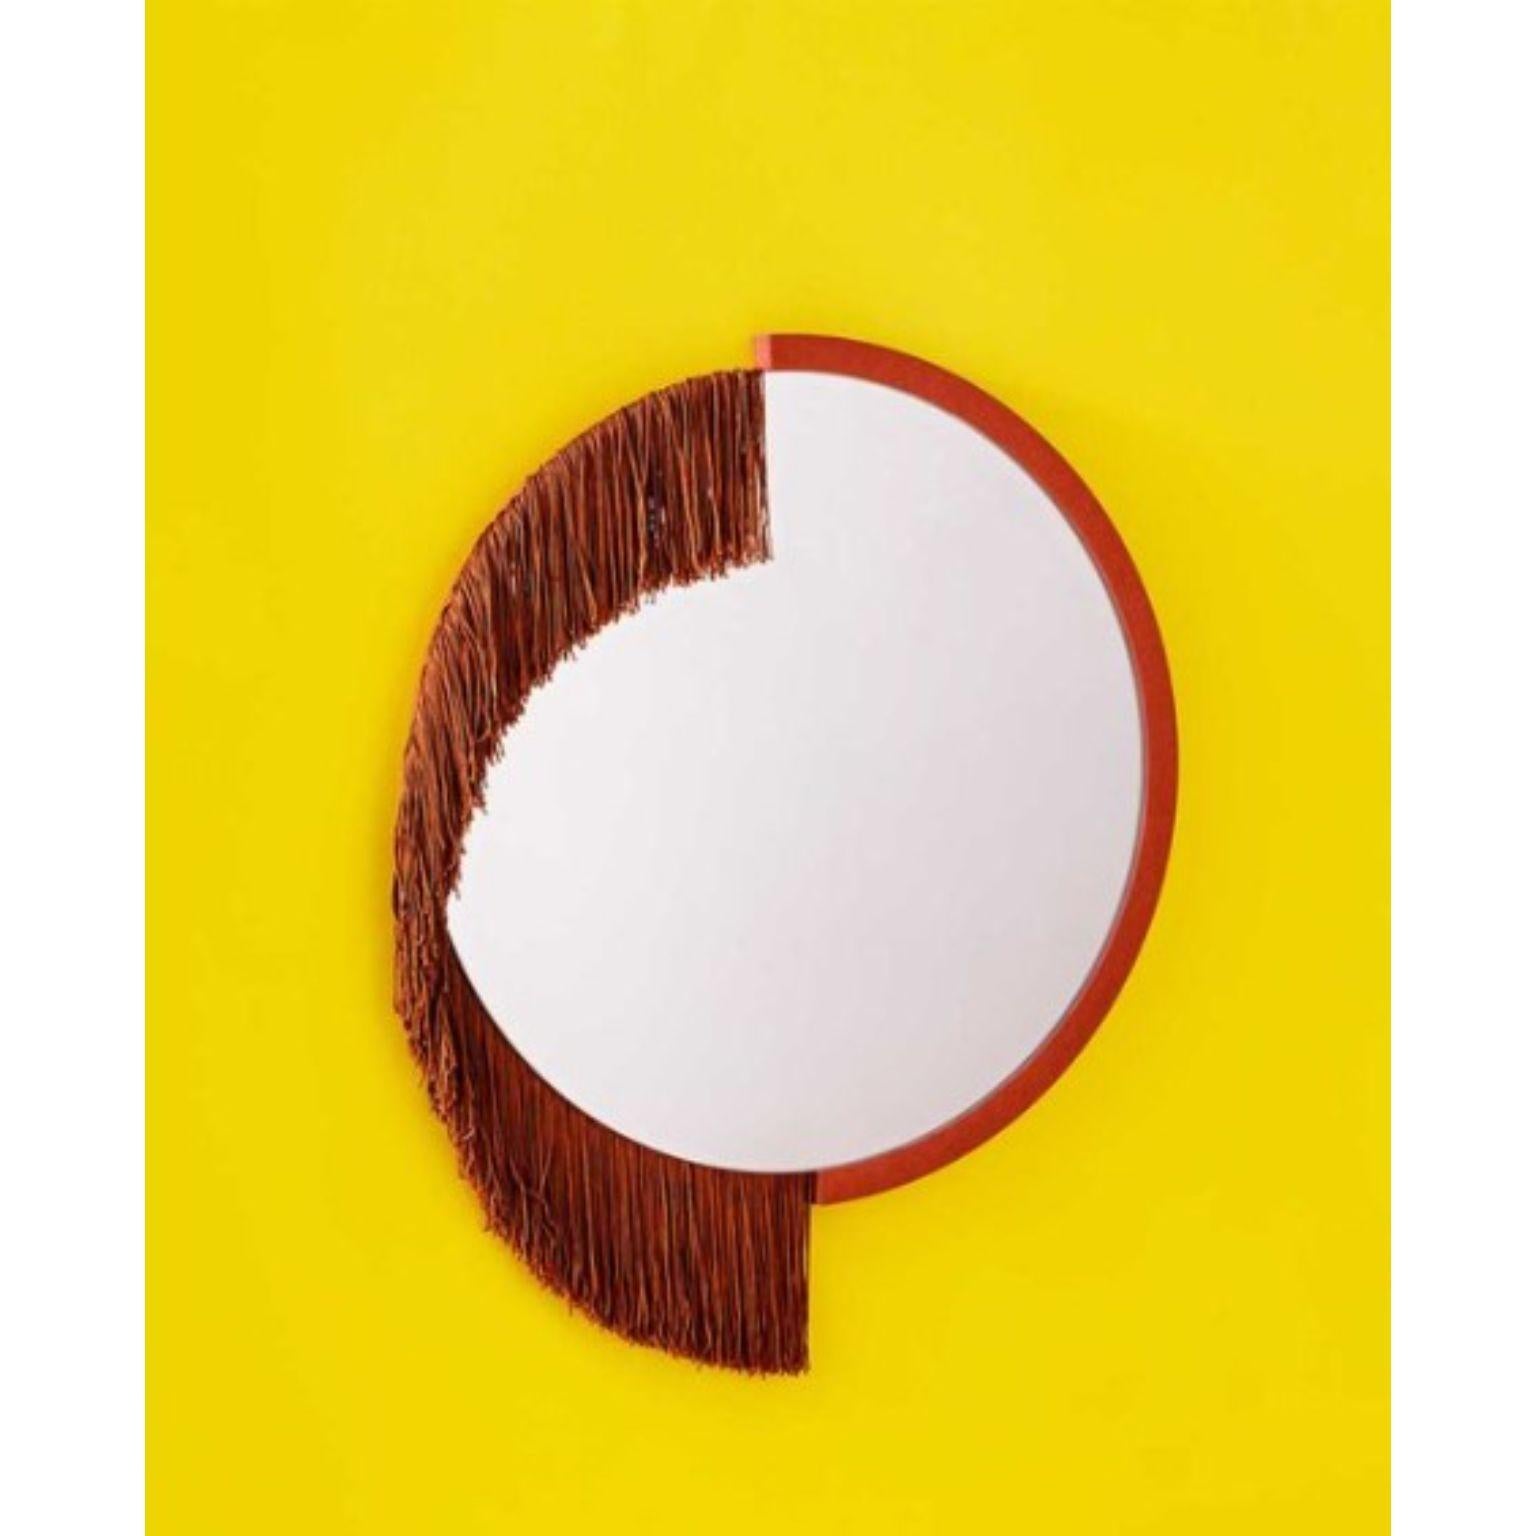 Boudoir Small Wall Mirror by Tero Kuitunen In New Condition For Sale In Geneve, CH